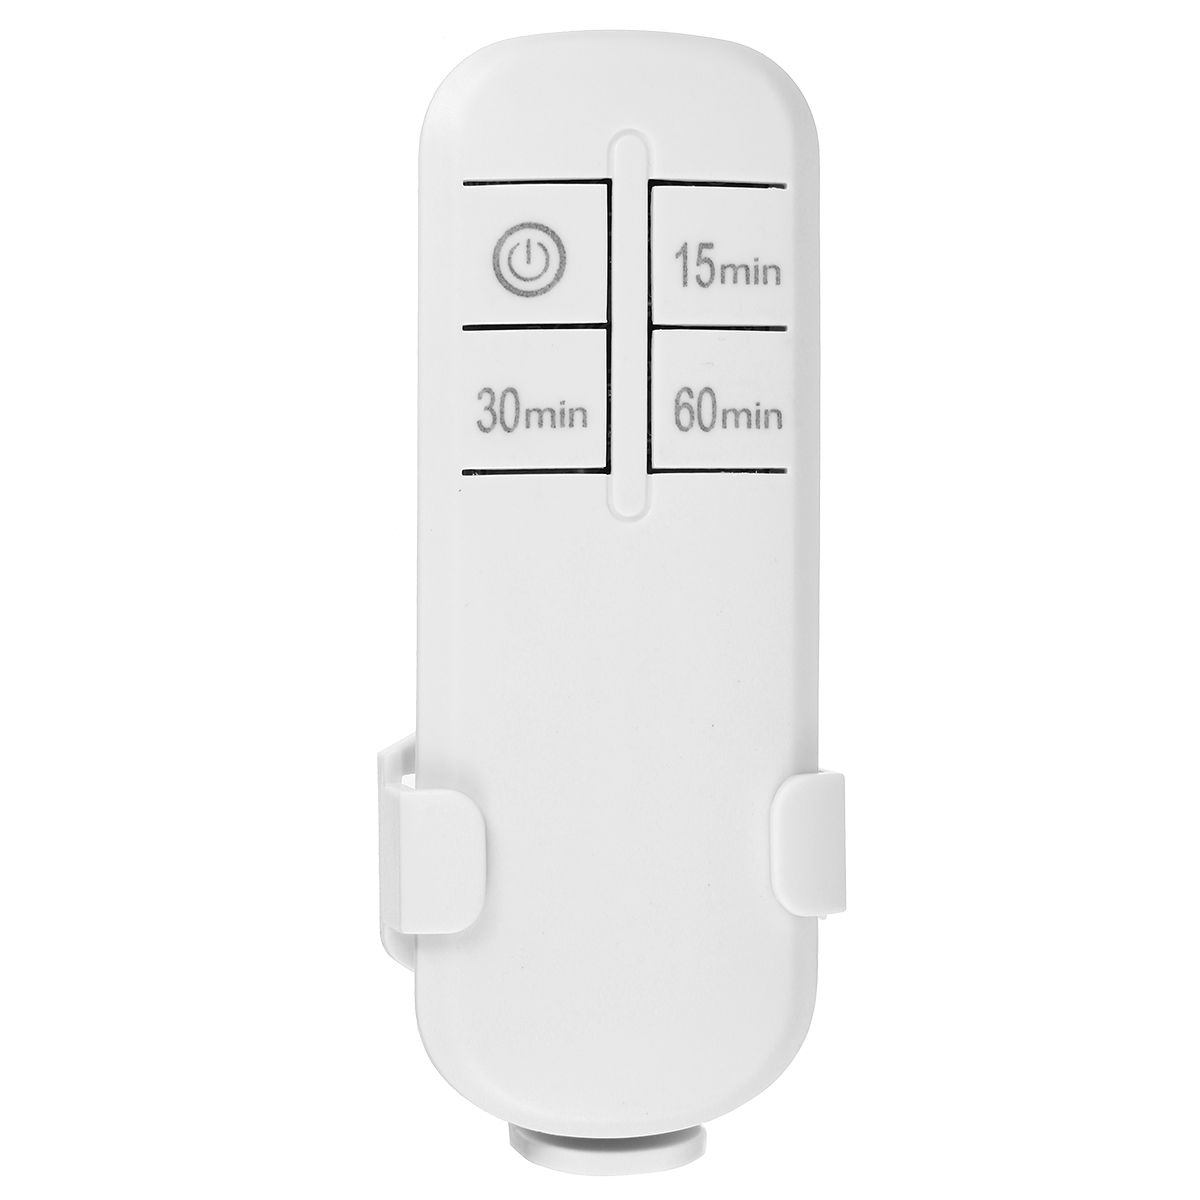 110V220V-Wireless-Remote-Control-E27-Lamp-Holder-Bulb-Adapter-With-Timer-Function-1691277